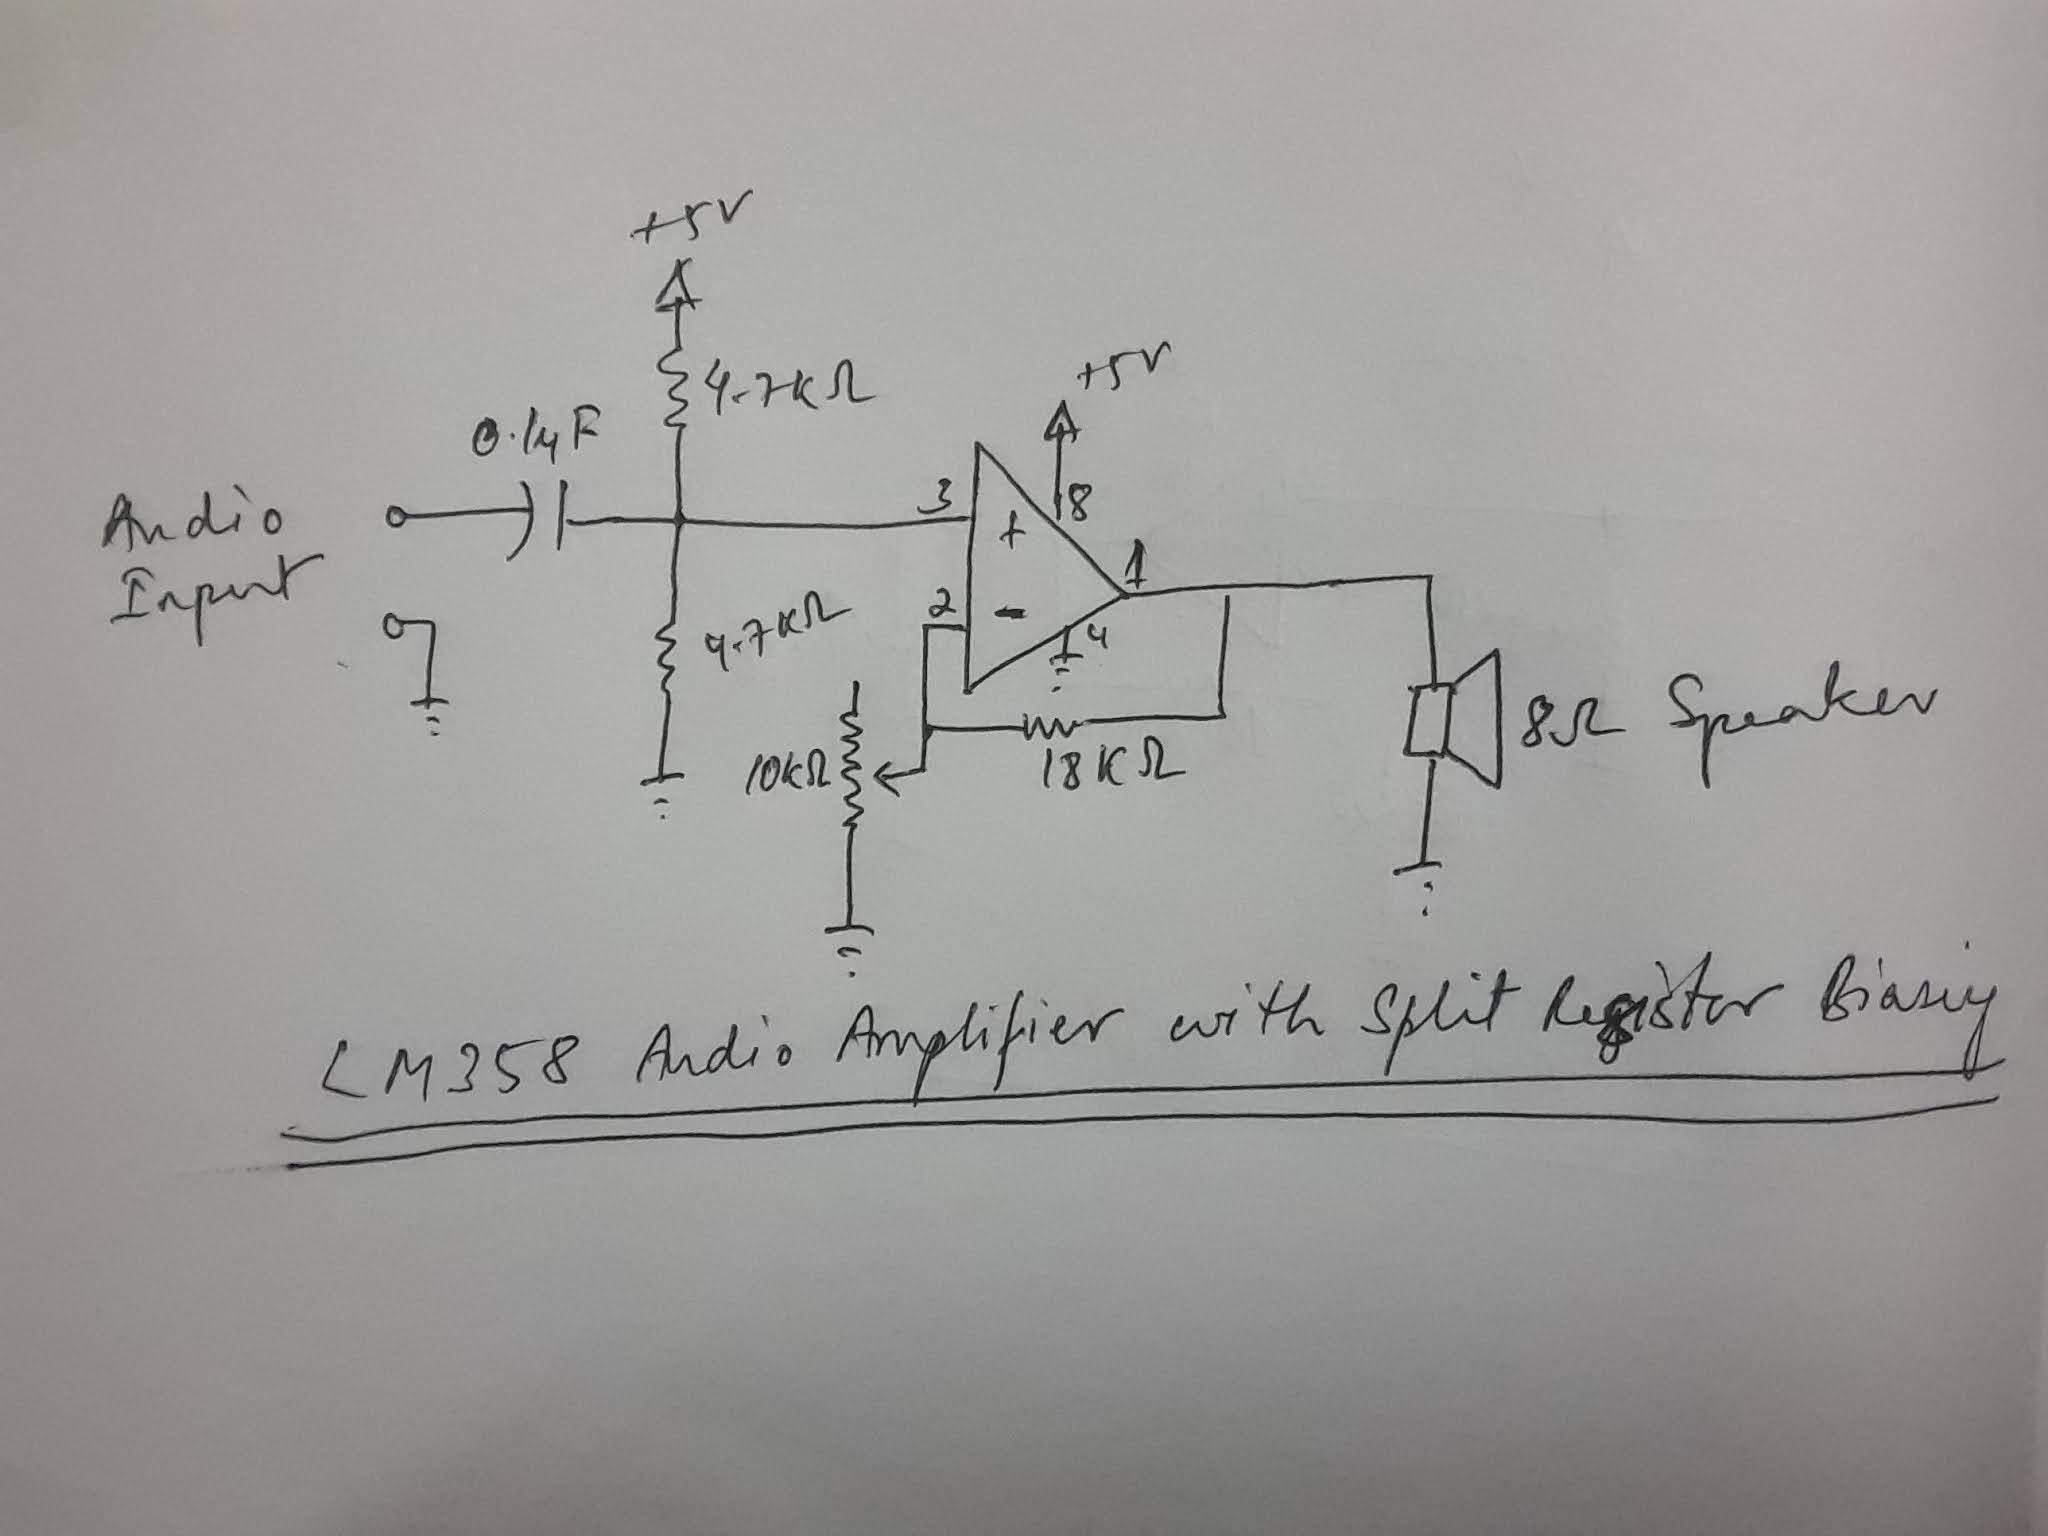 LM358 Audio Amplifier in Non-Inverting with Split Resistor Biasing